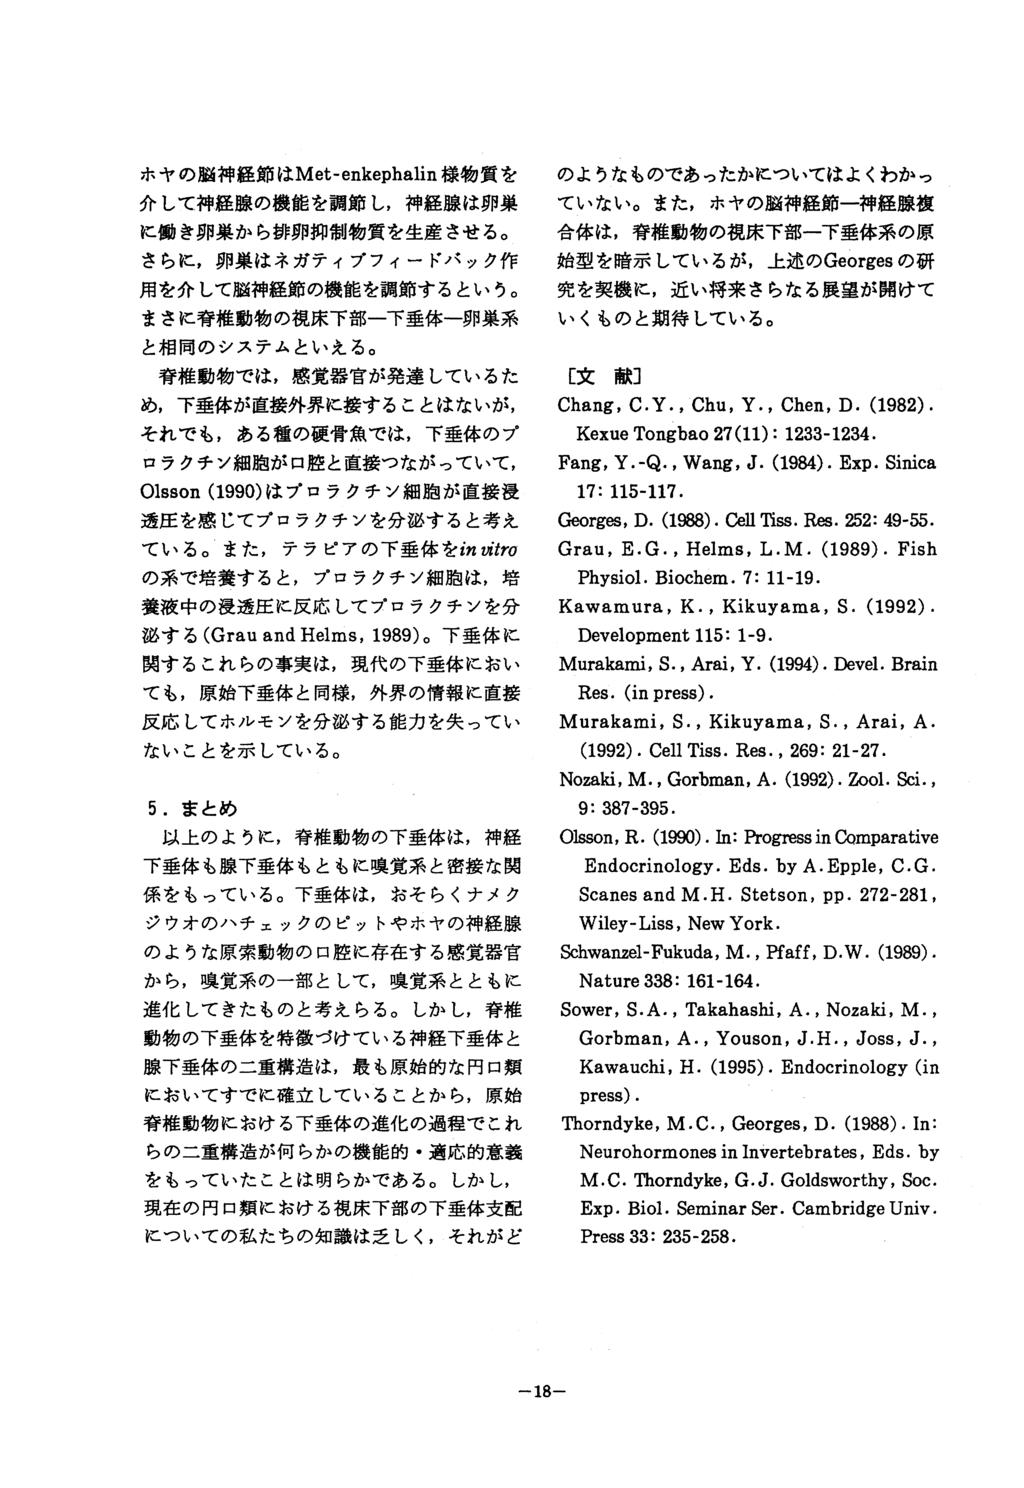 Chang, C.Y., Chu, Y., Chen, D. (1982). Kexue Tongbao 27(11): 1233-1234. Fang, Y.-Q., 17: 115-117. Wang, J. (1984). Exp. Sinica Georges, D. (1988). Cell Tiss. Res. 252: 49-55. Grau, E.G., Helms, L.M.